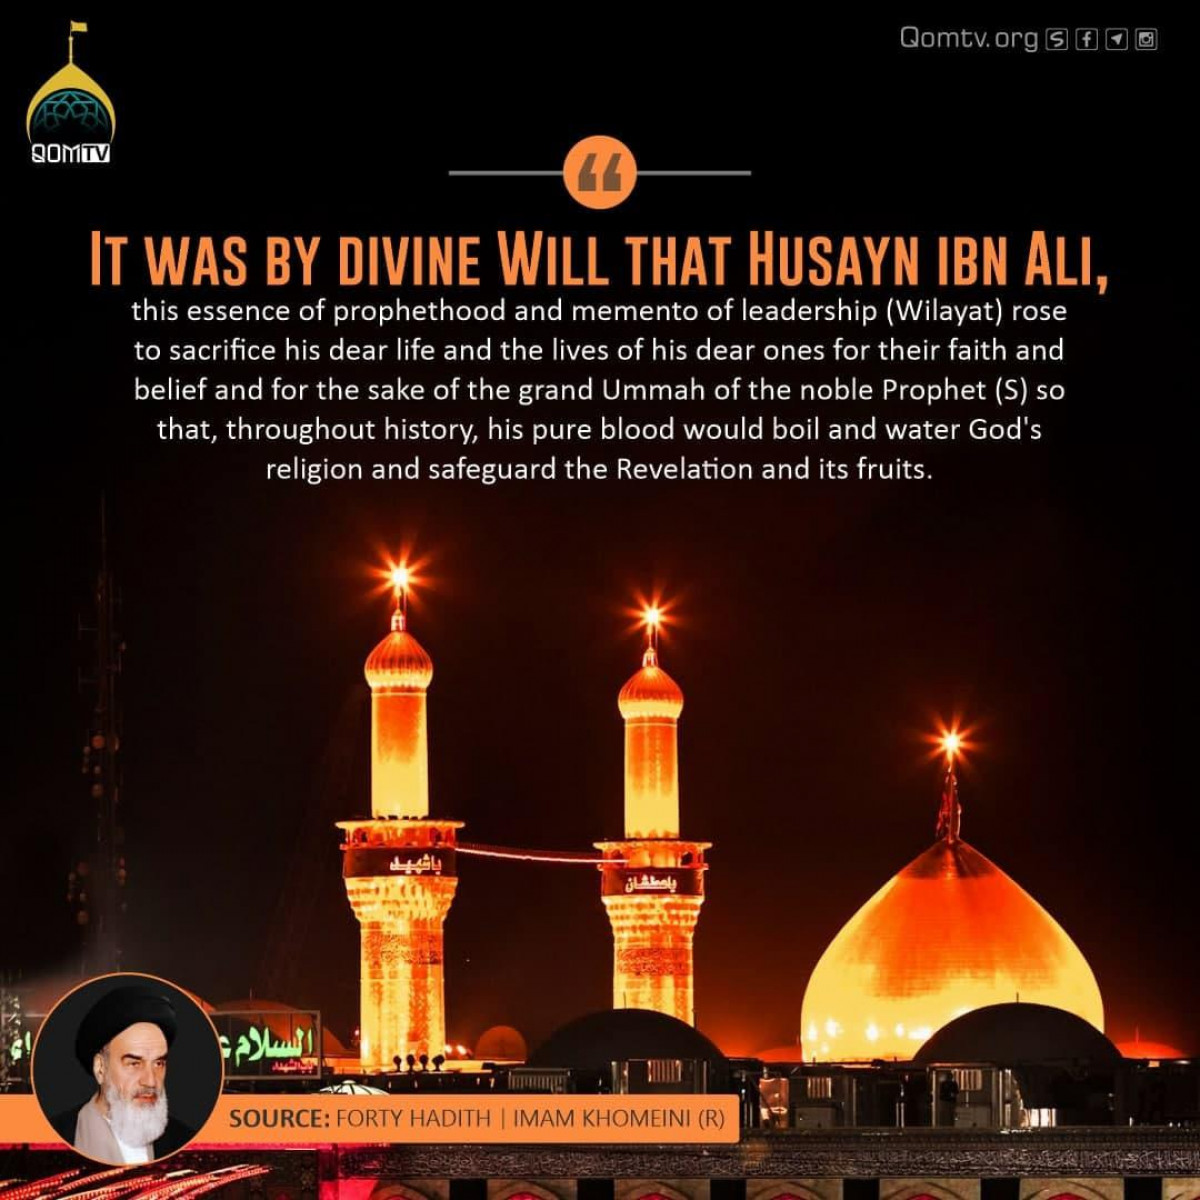 "It was by divine Will that Husayn ibn Ali, this essence of prophethood and memento of leadership (Wilayat) rose to sacrifice